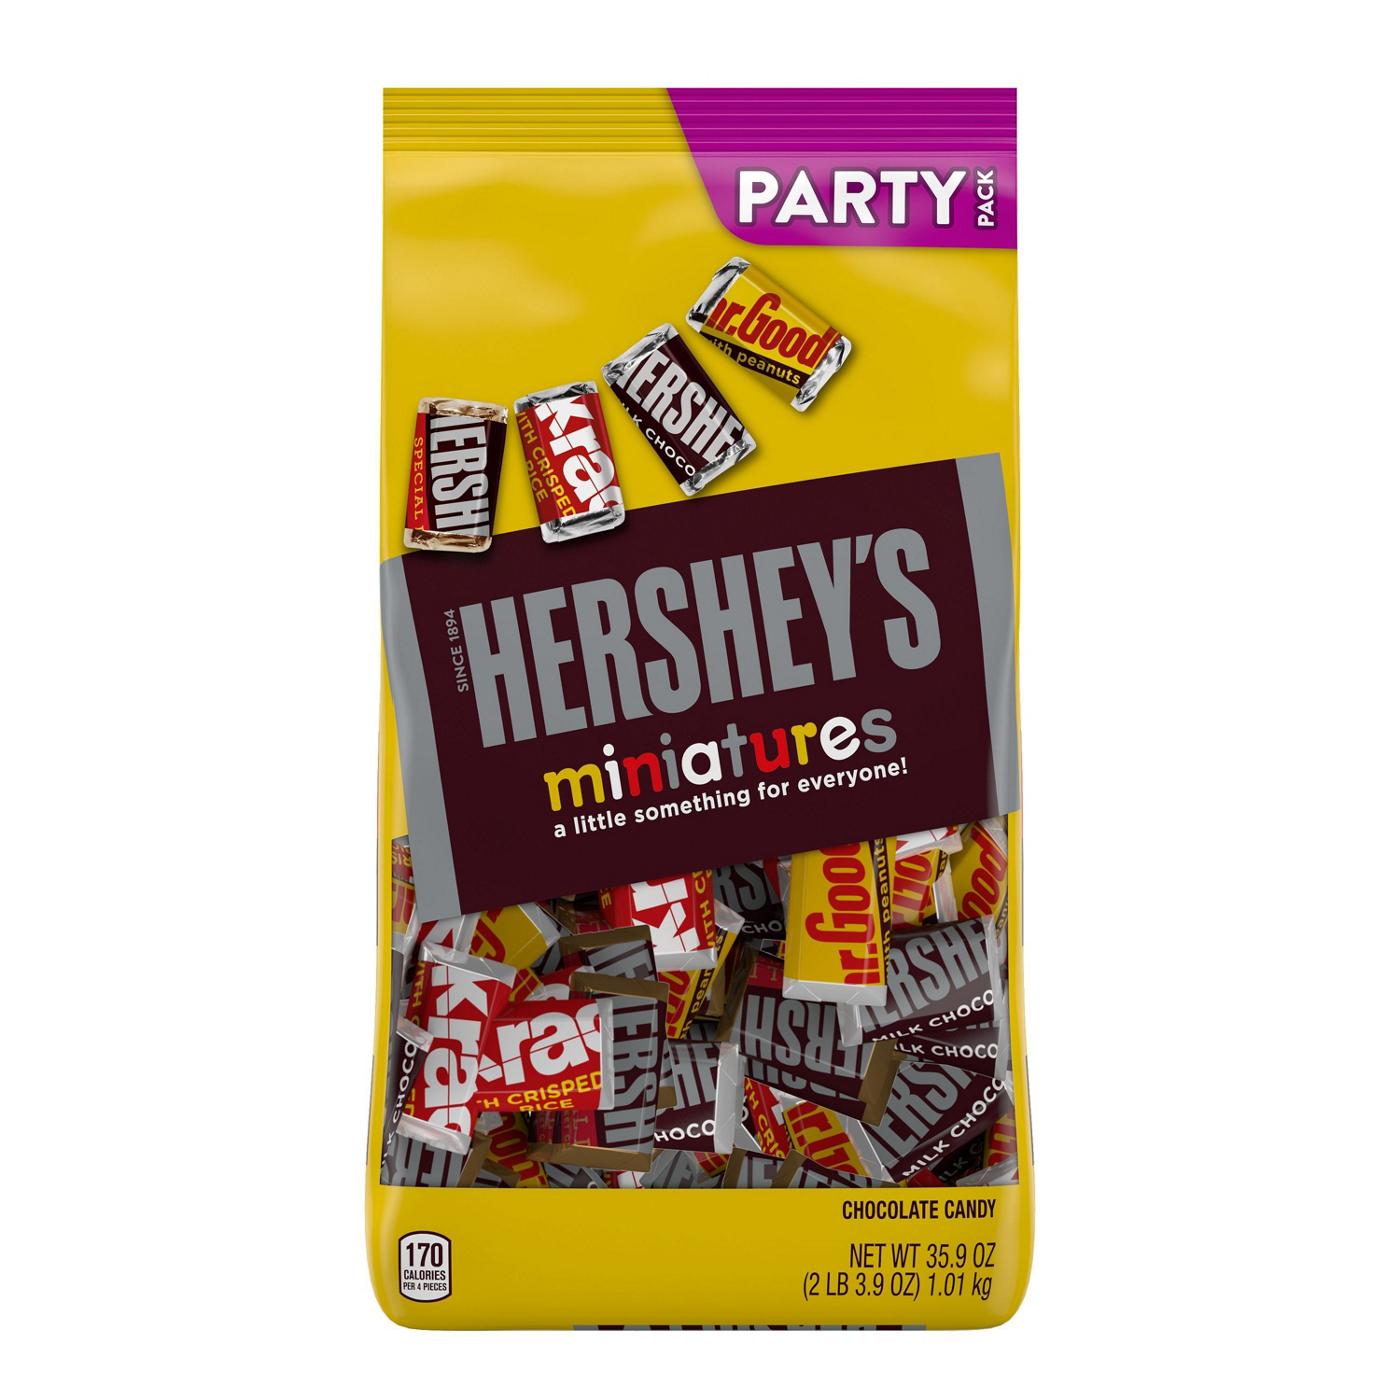 Hershey's Miniatures Assorted Chocolate Candy - Party Pack; image 1 of 5